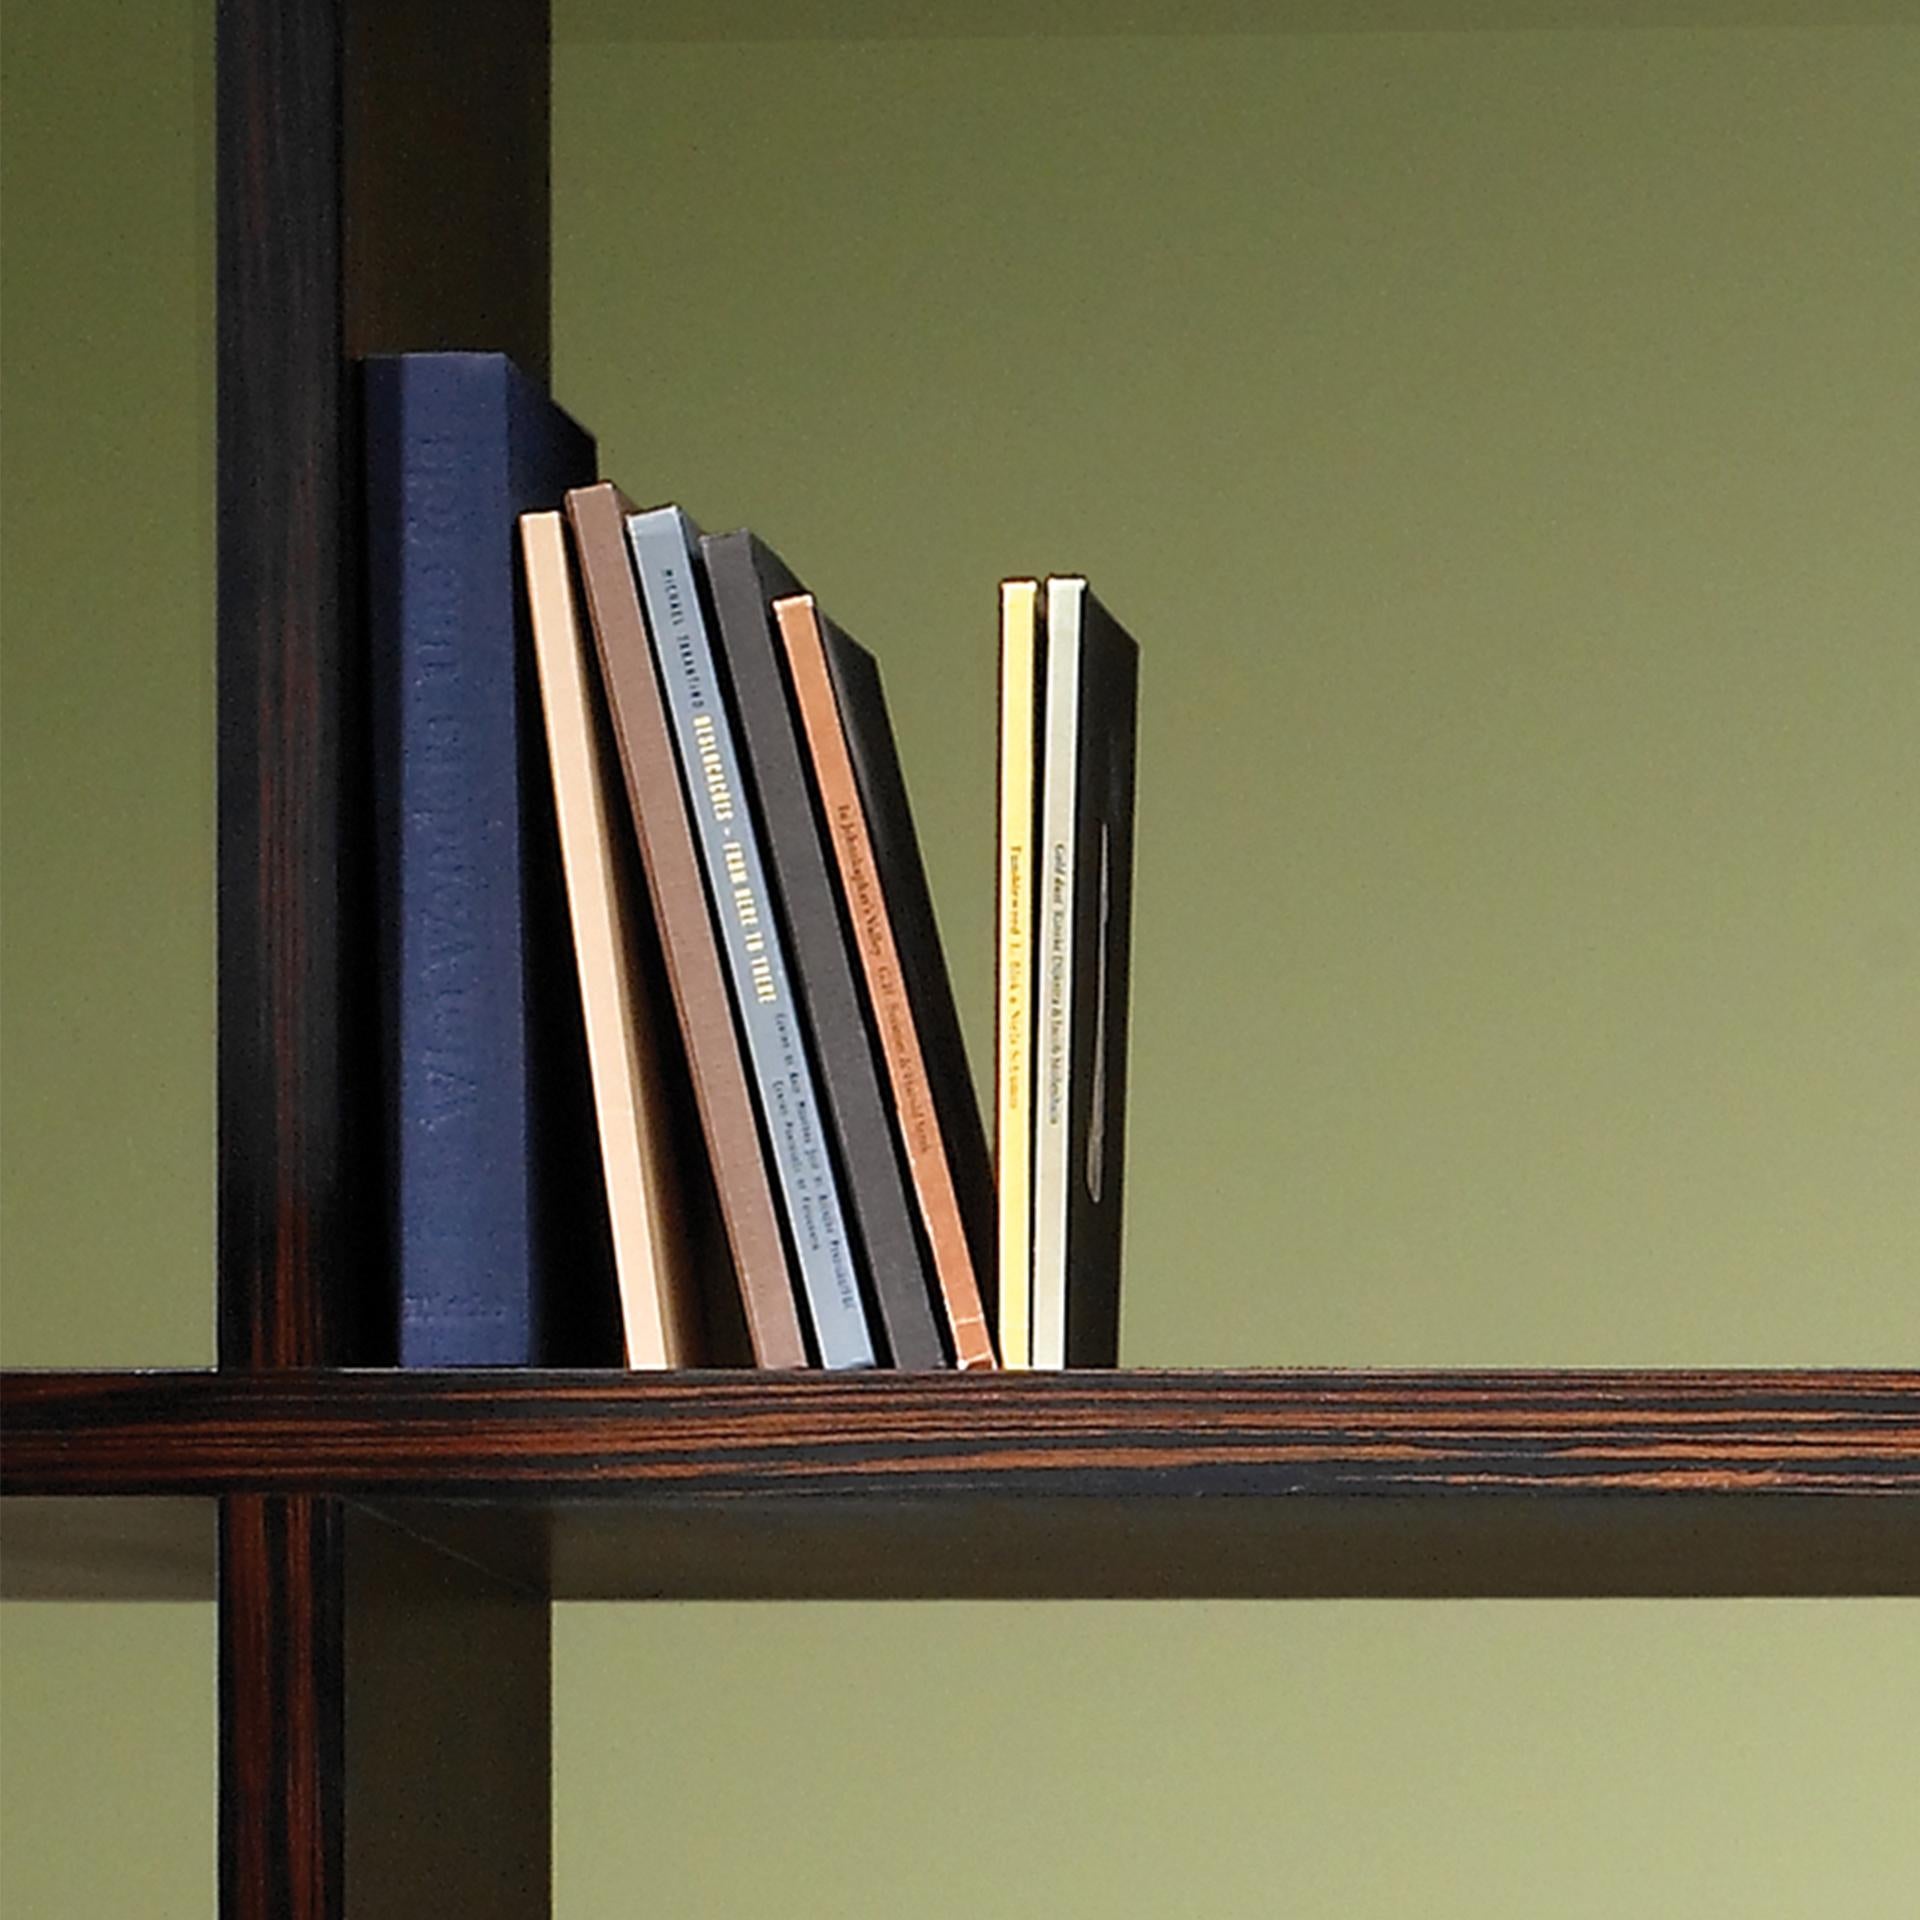 Vertical bookcase in ebony.

Bespoke / Customizable
Identical shapes with different sizes and finishings.
All RAL colors available. (Mate / Half Gloss / Gloss)